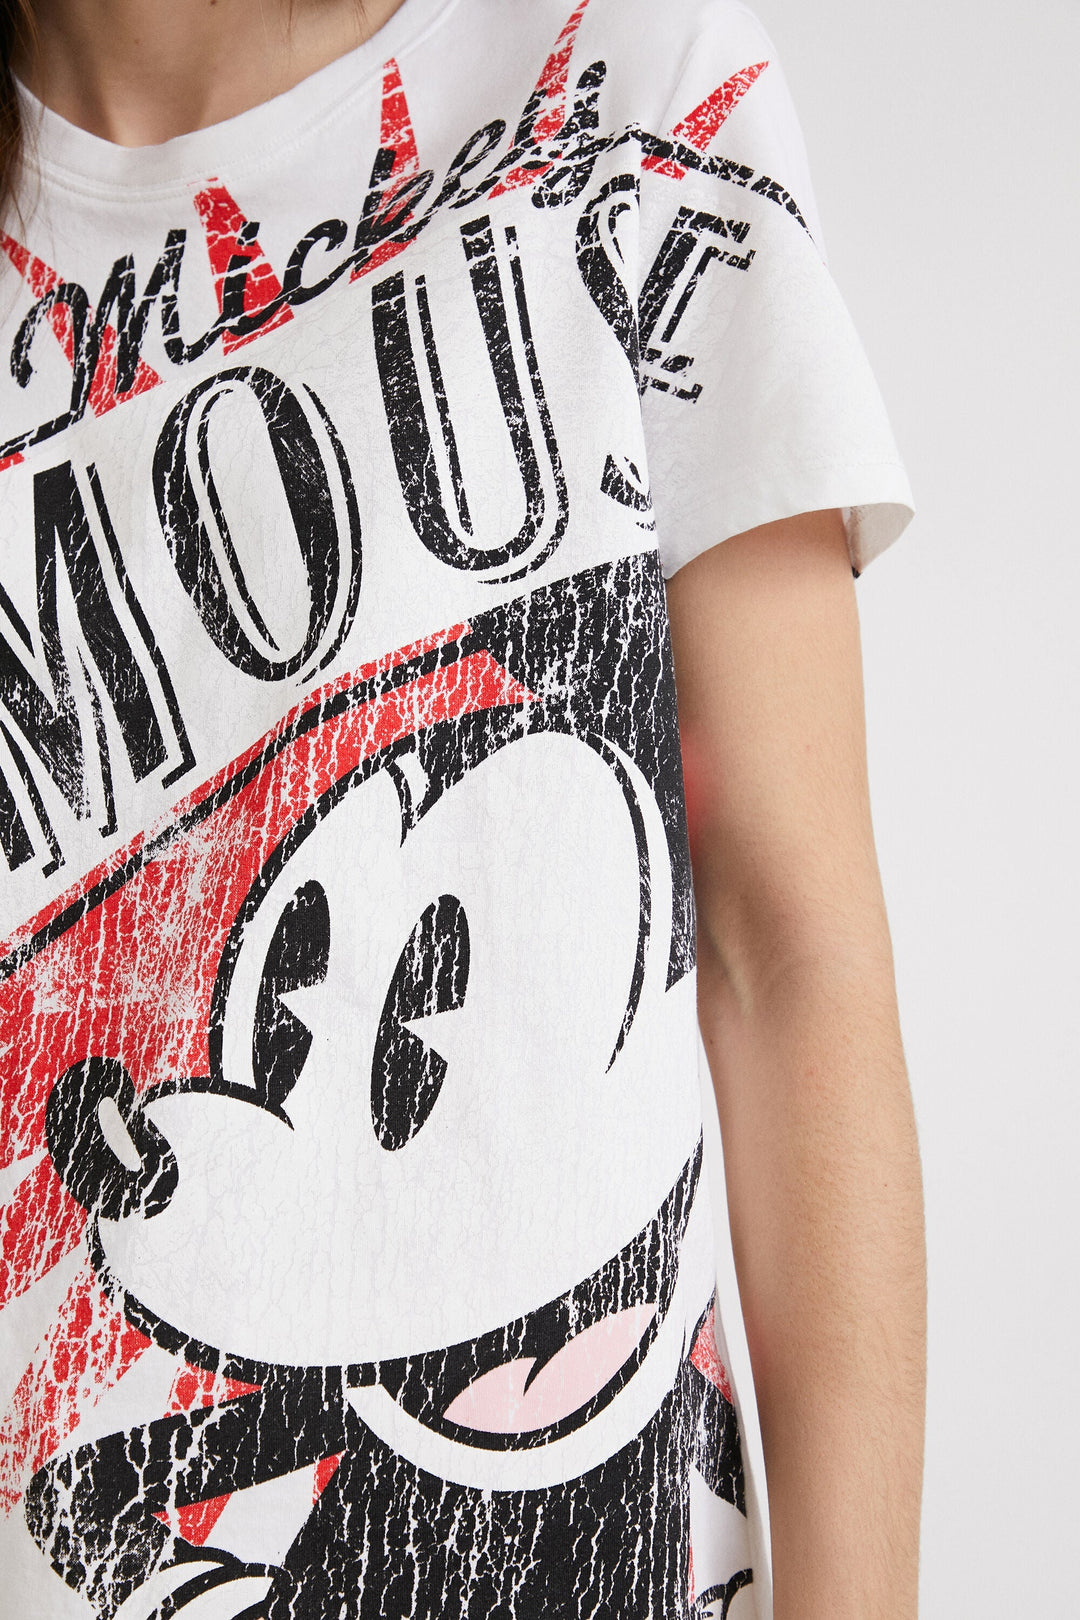 Mickey Mouse Wow T-Shirt